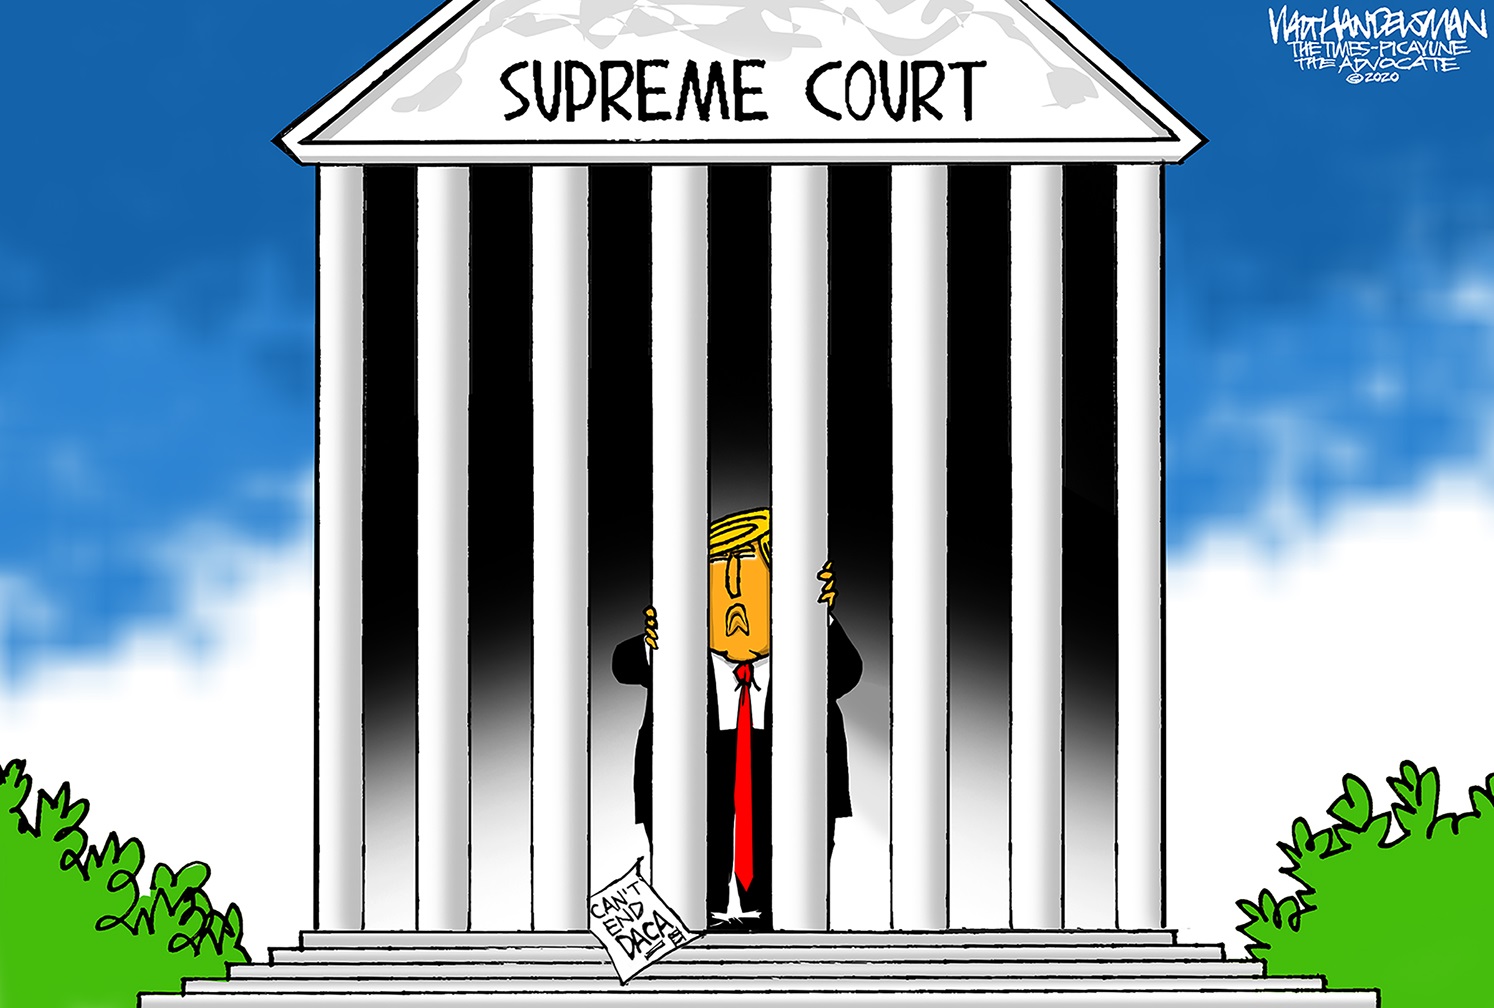 Editorial cartoons for June 21, 2020: Supreme Court, Trump rally, face  masks 